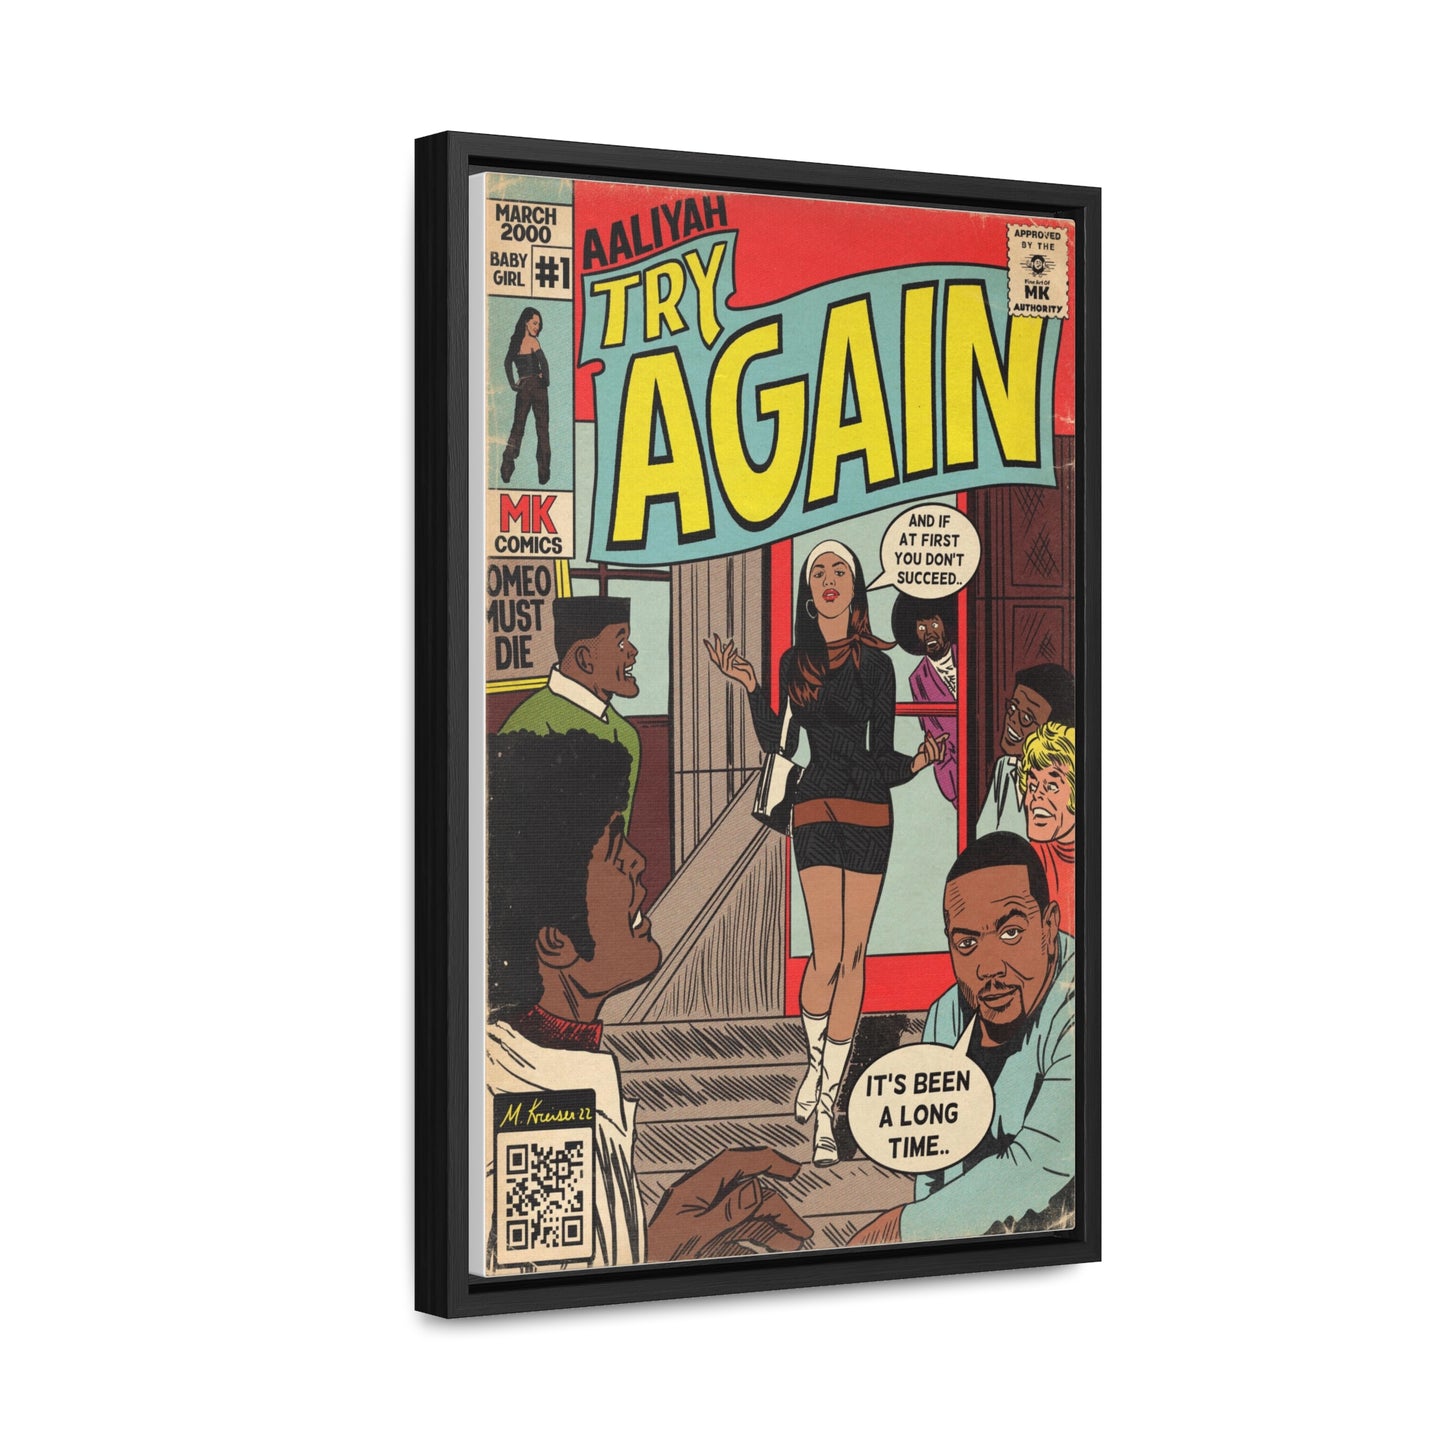 Aaliyah - Try Again - Gallery Canvas Wraps, Vertical Frame